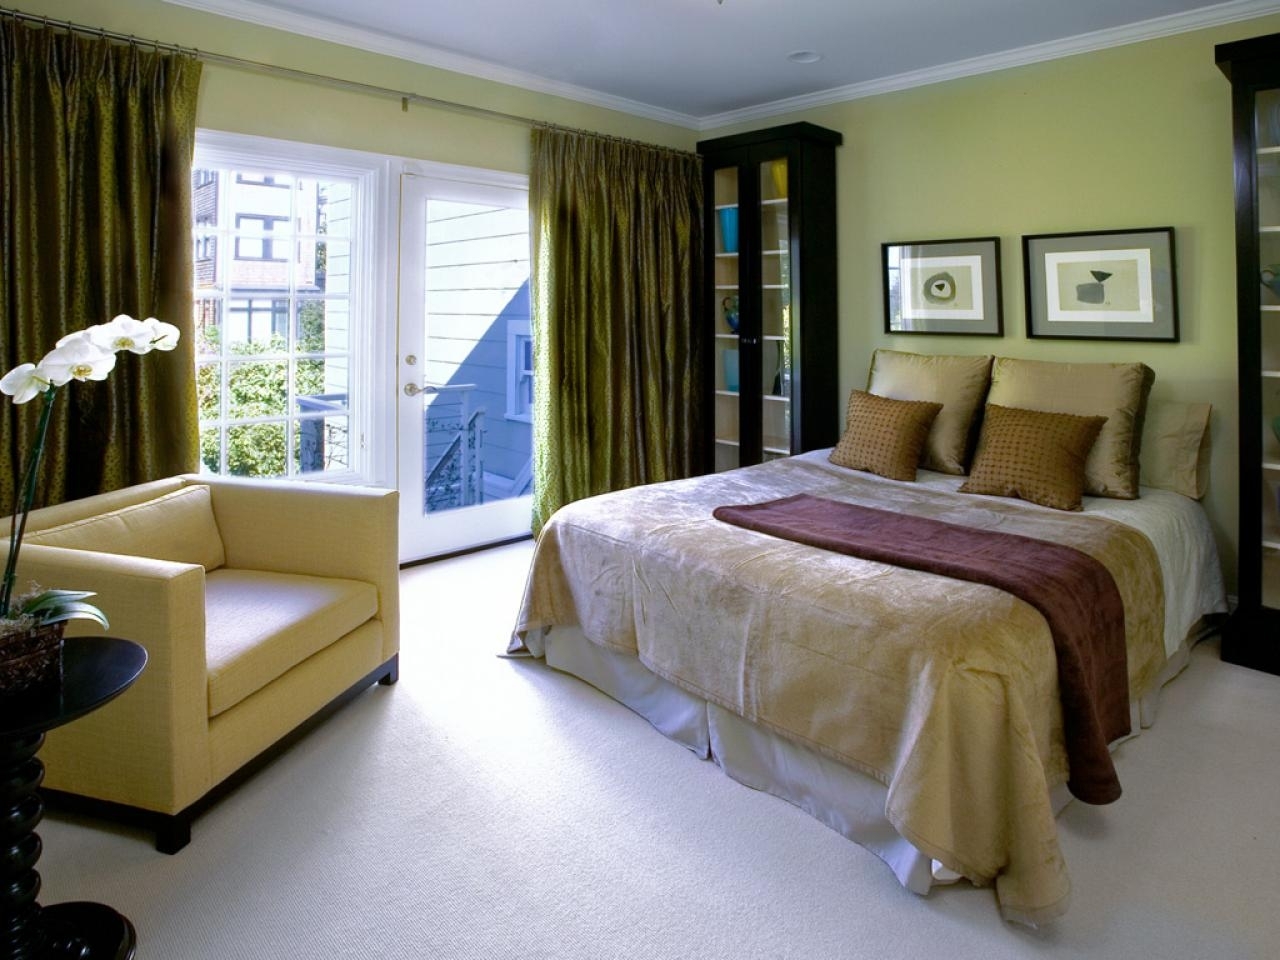 Decorative Painting Ideas For Bedrooms